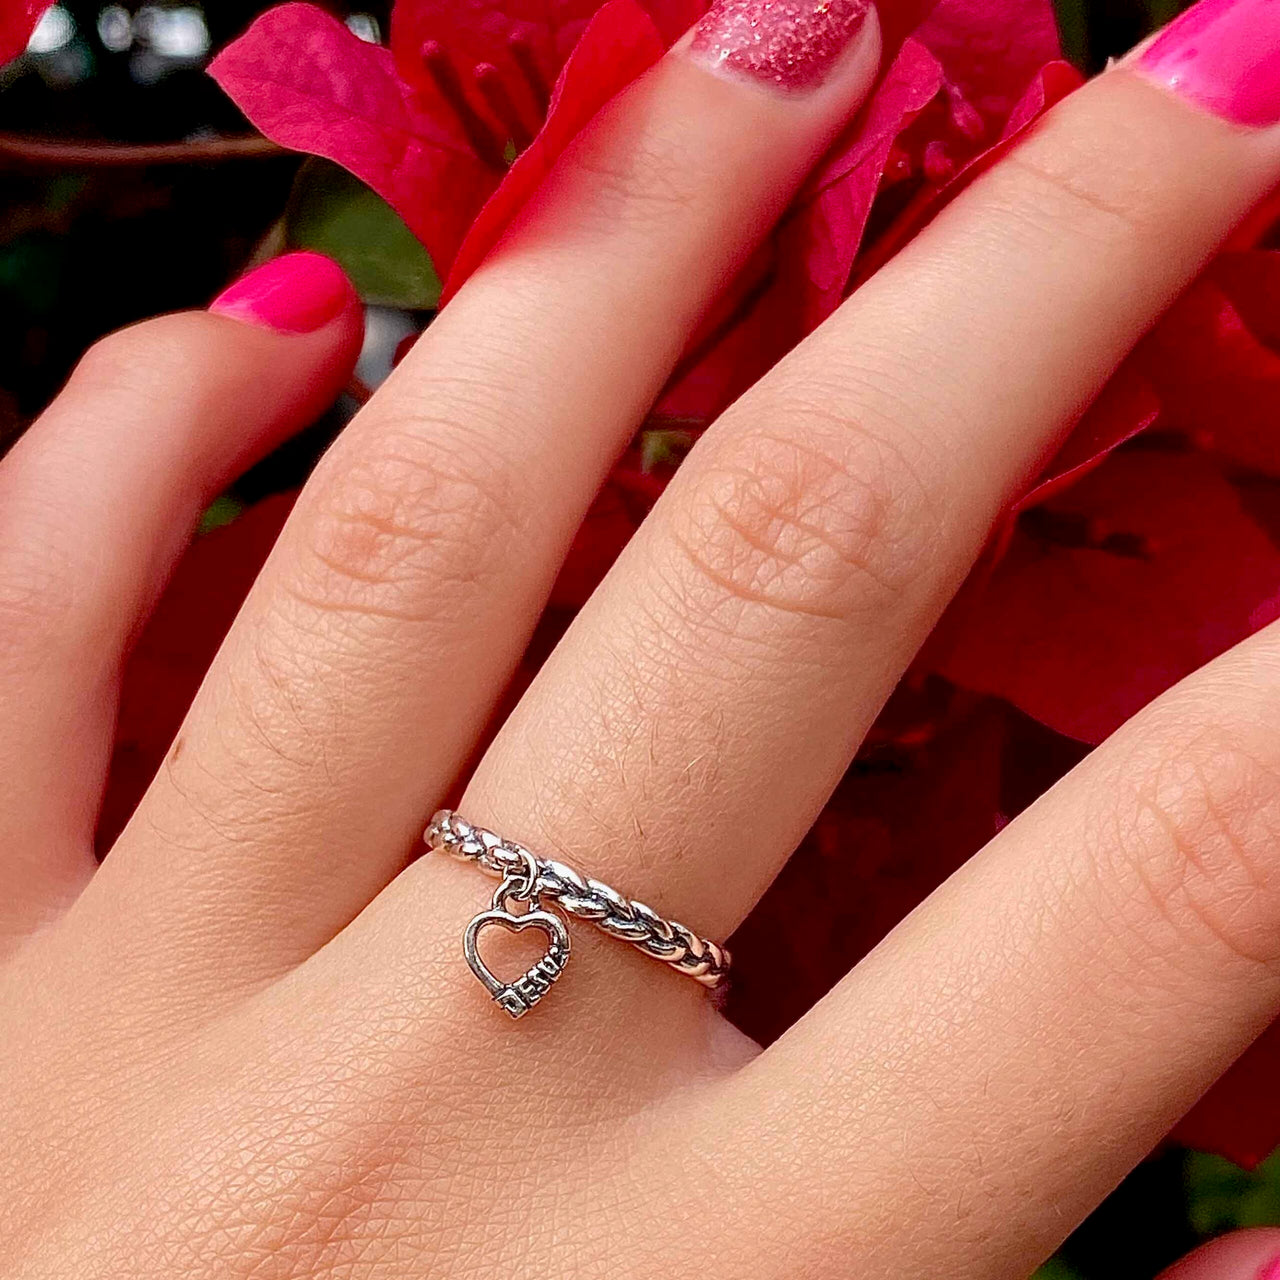 Rope Band With Dangling Heart Ring Sterling Silver Jewelry